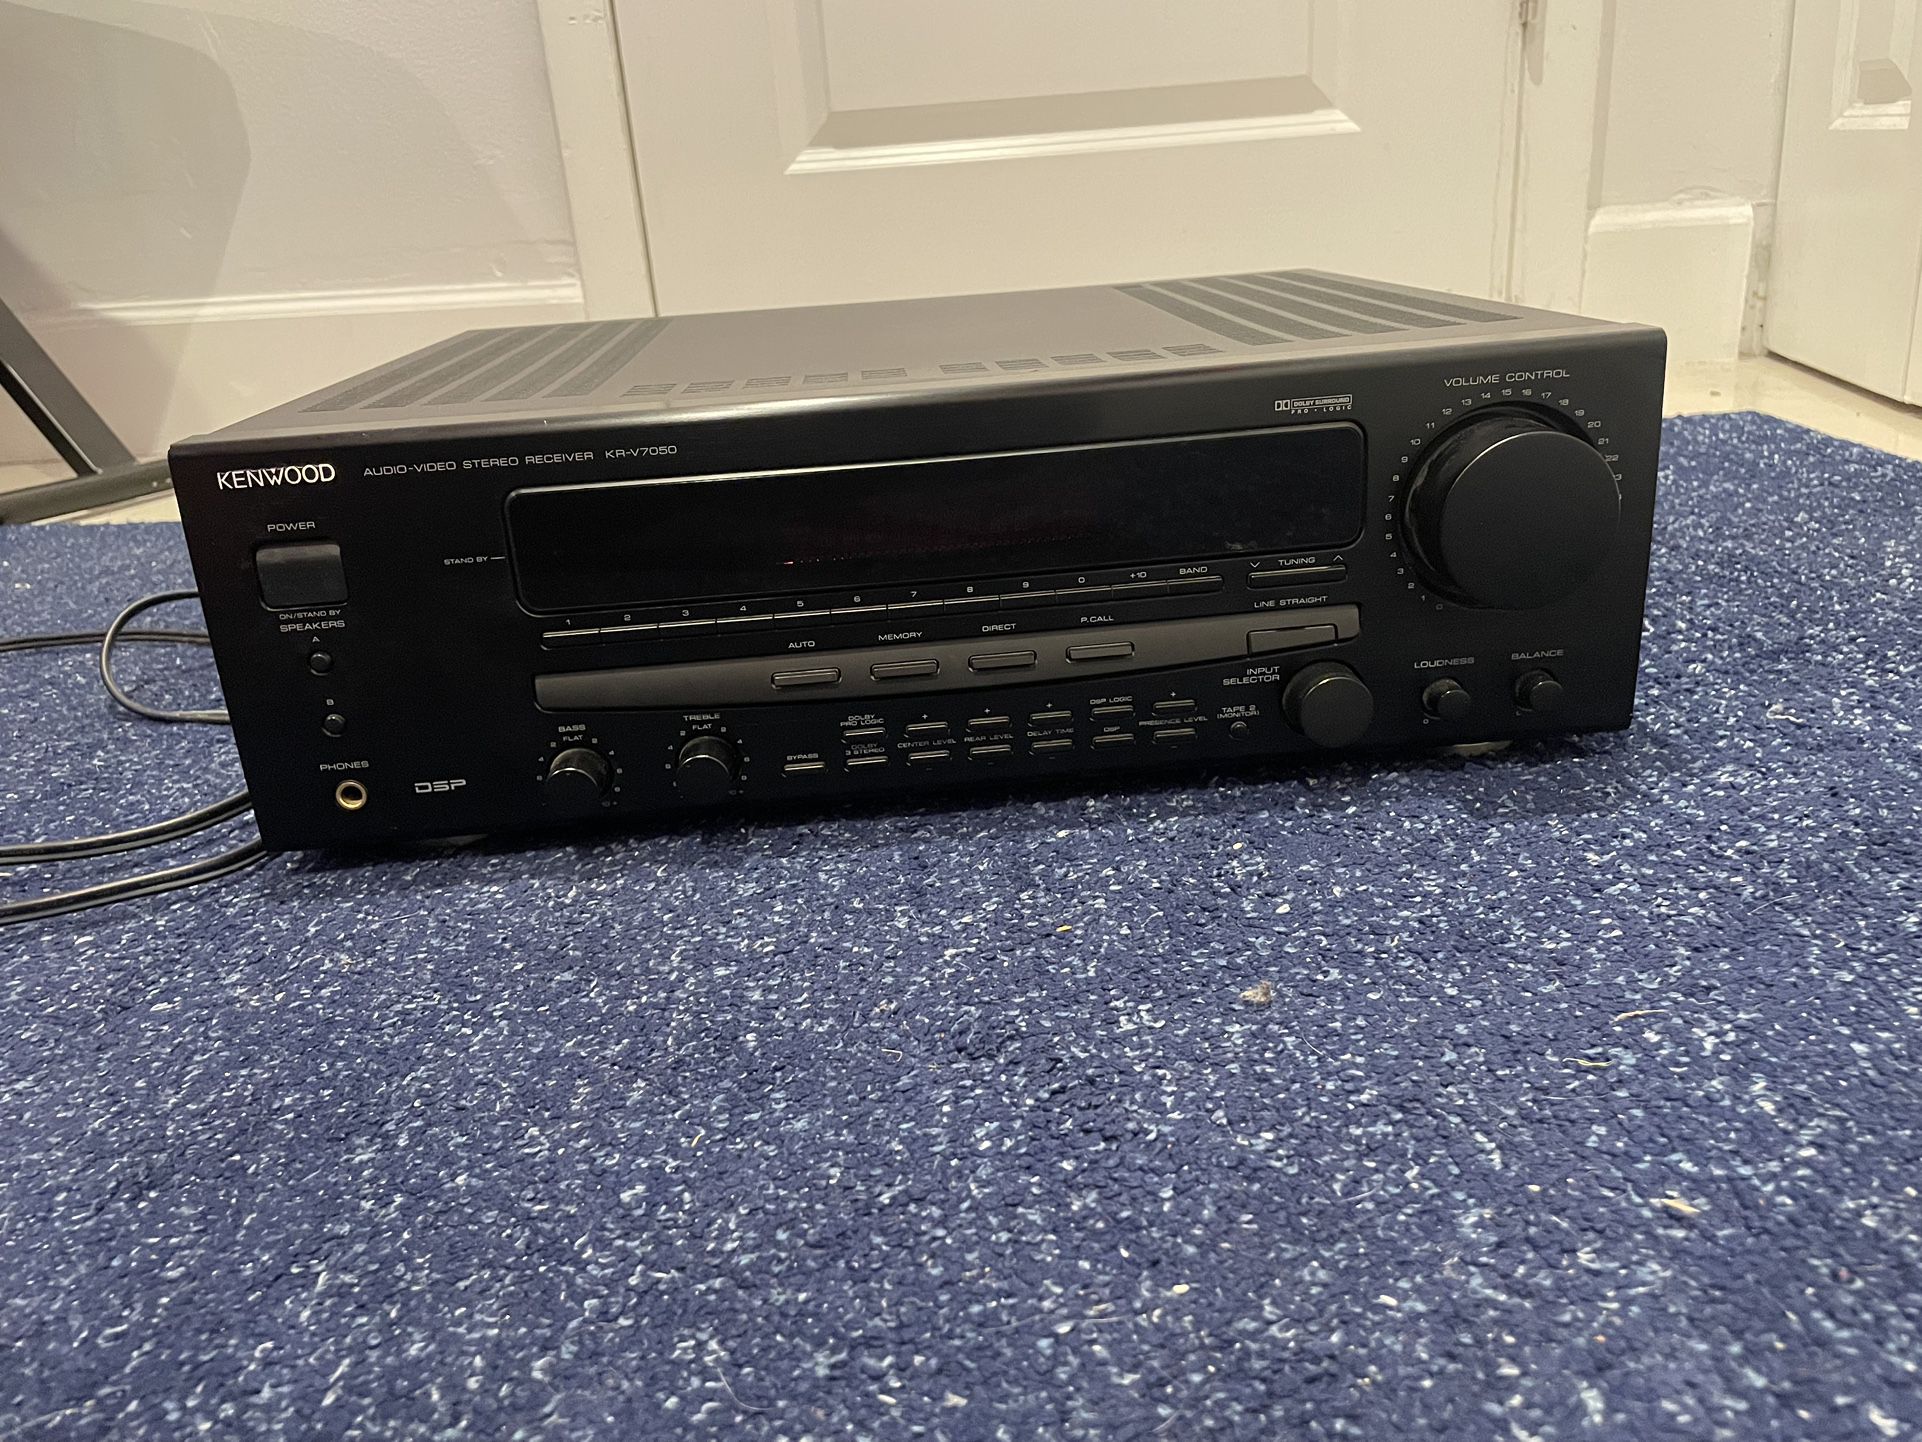 Kenwood KR-V7050 8-ohm 100W/ch Dolby Surround Audio Video Stereo Receiver Works